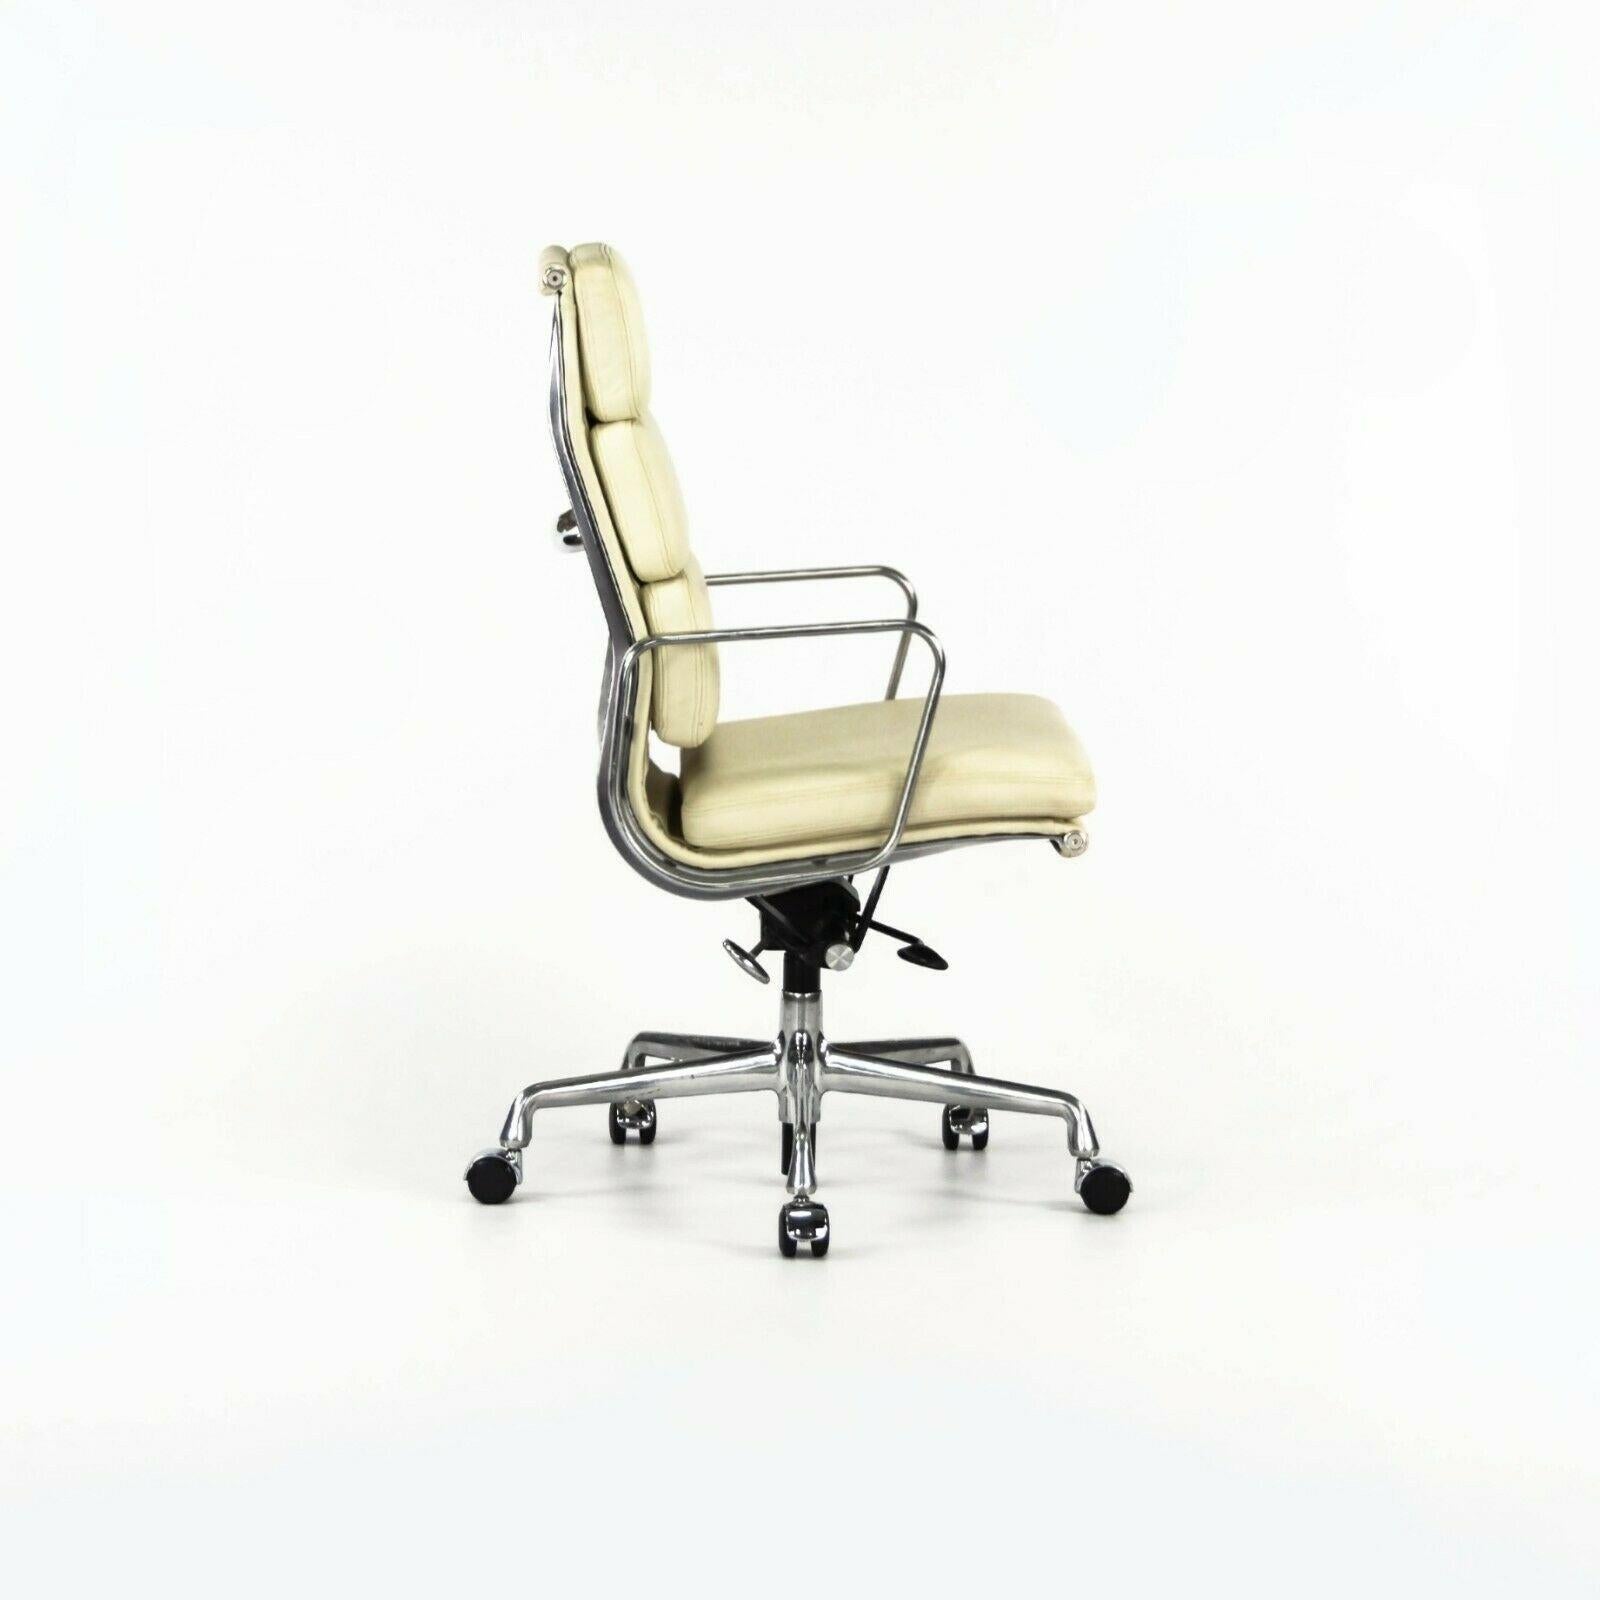 American 2011 Herman Miller Eames Aluminum Group Executive Soft Pad Desk Chair Ivory 12+